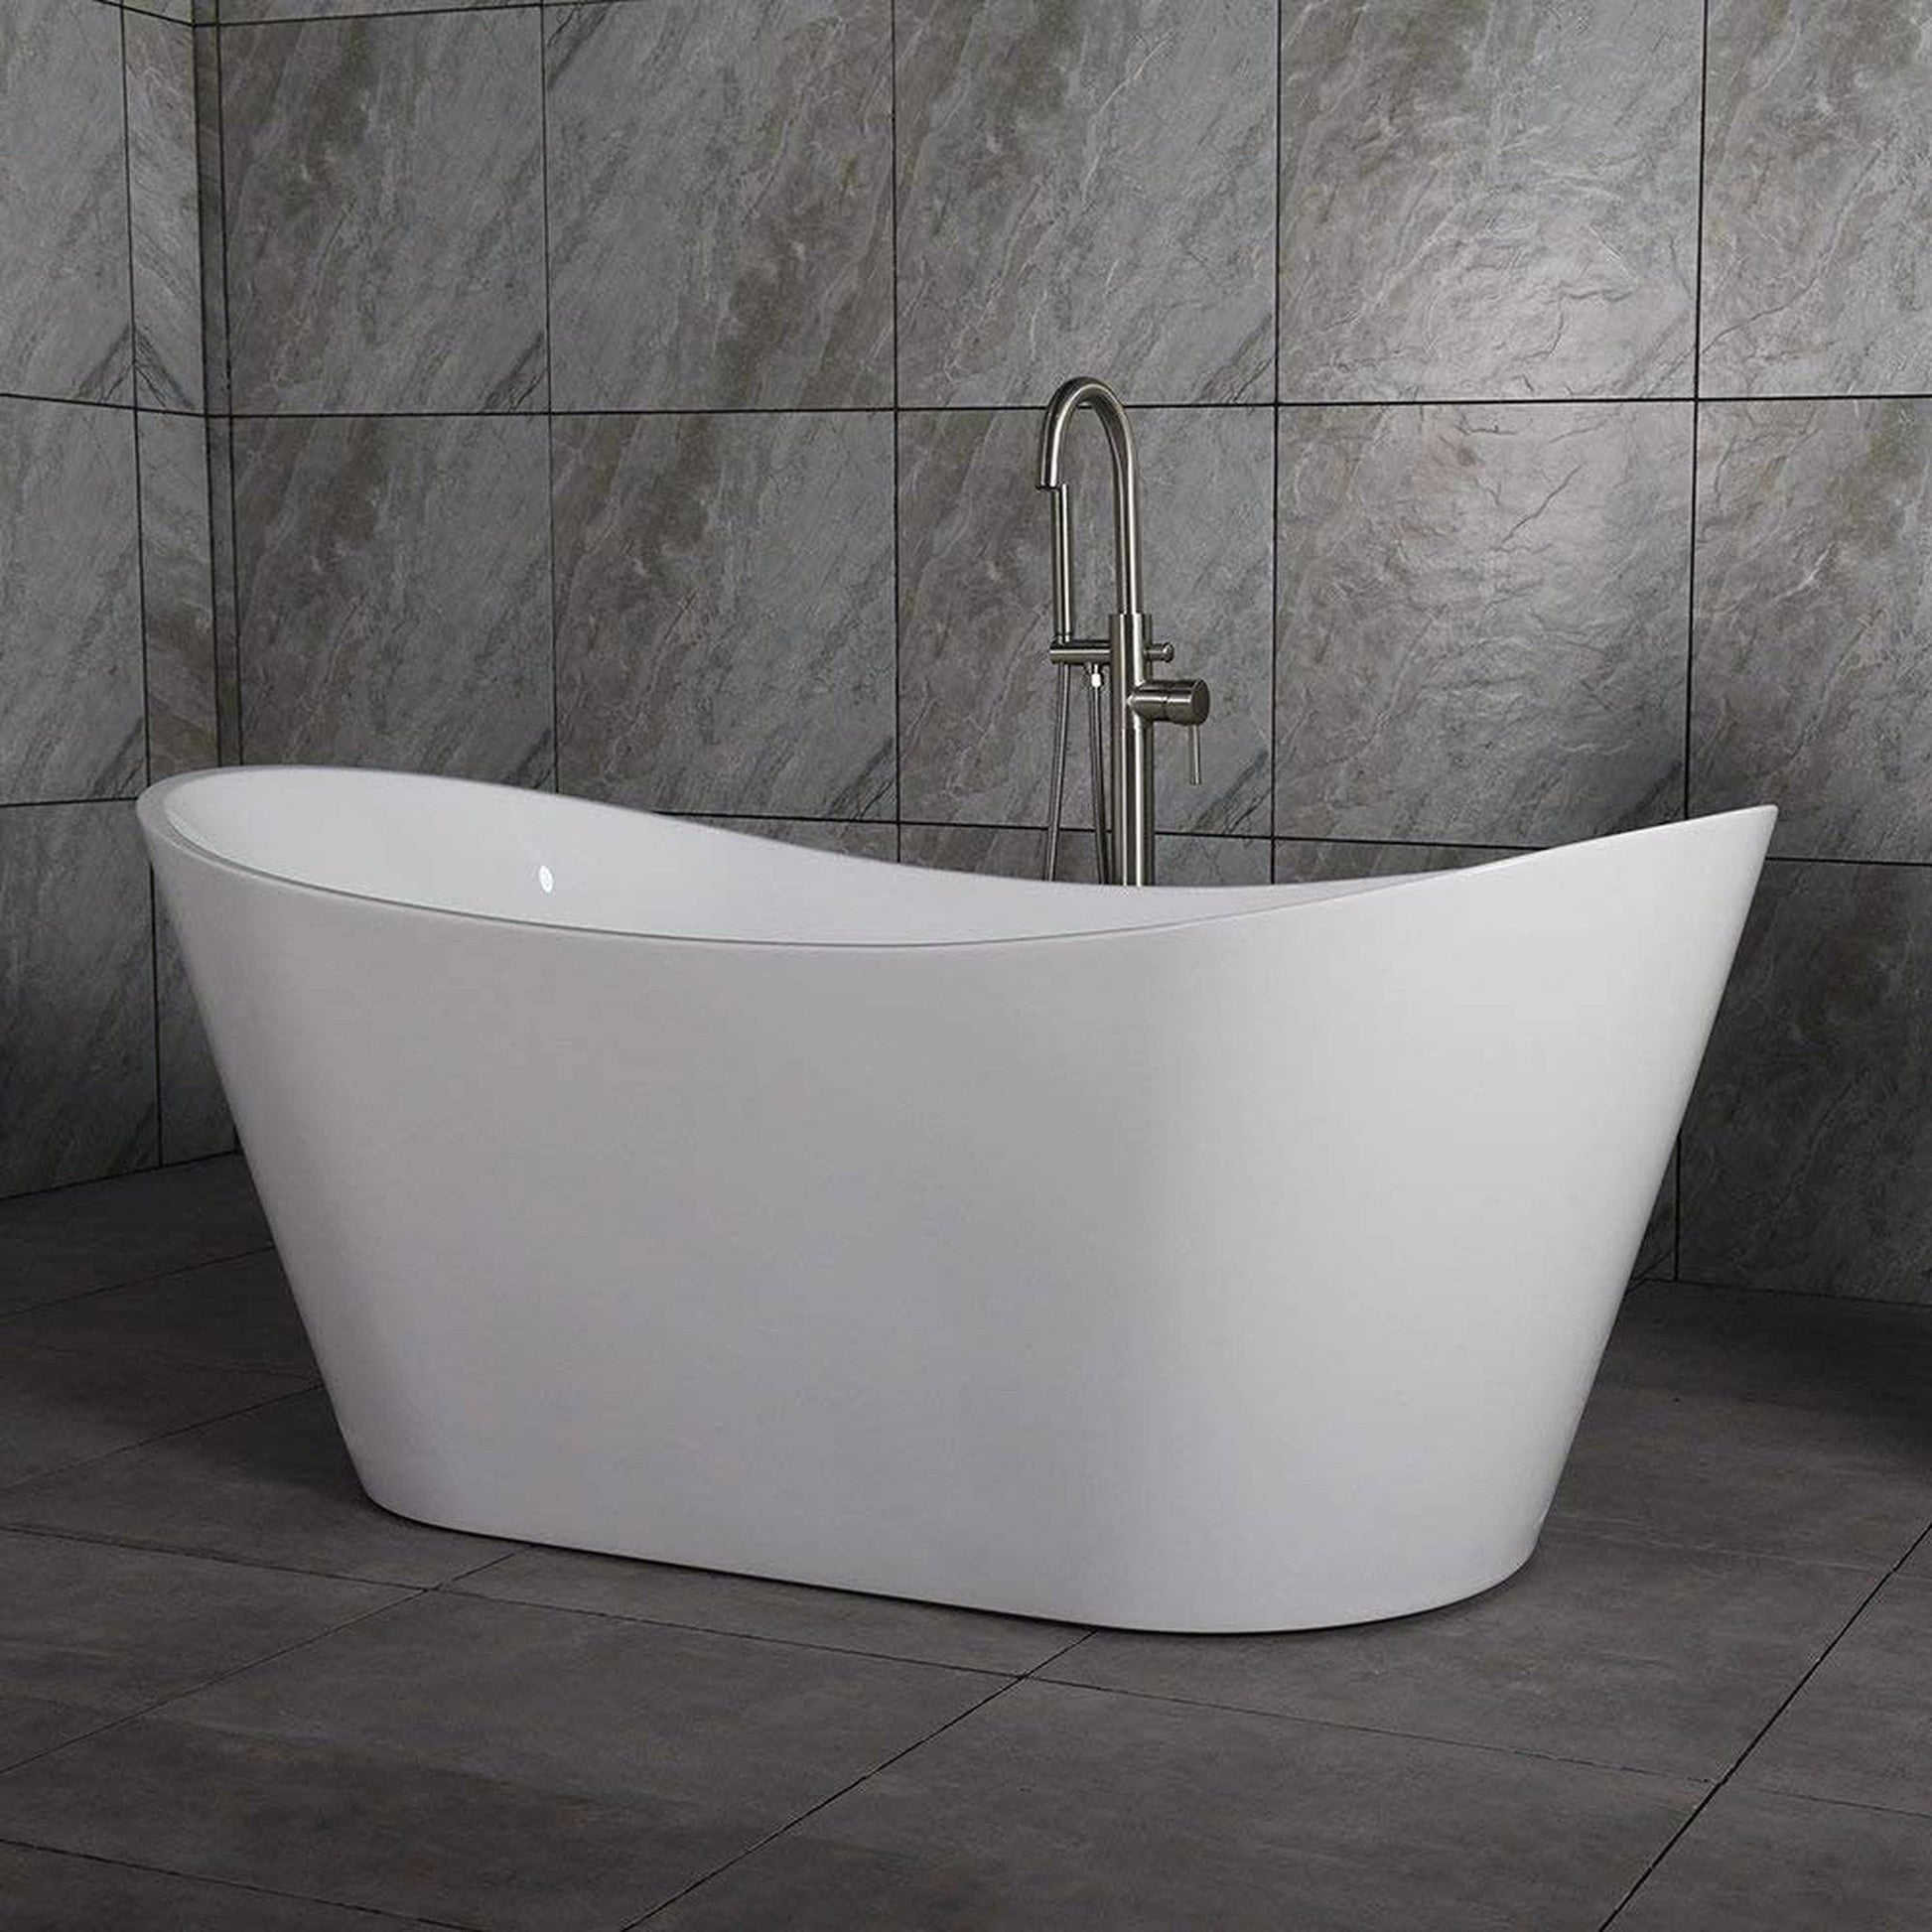 WoodBridge B0010 67" White Acrylic Freestanding Contemporary Soaking Bathtub With Brushed Nickel Drain, Overflow, F0001BNRD Tub Filler and Caddy Tray